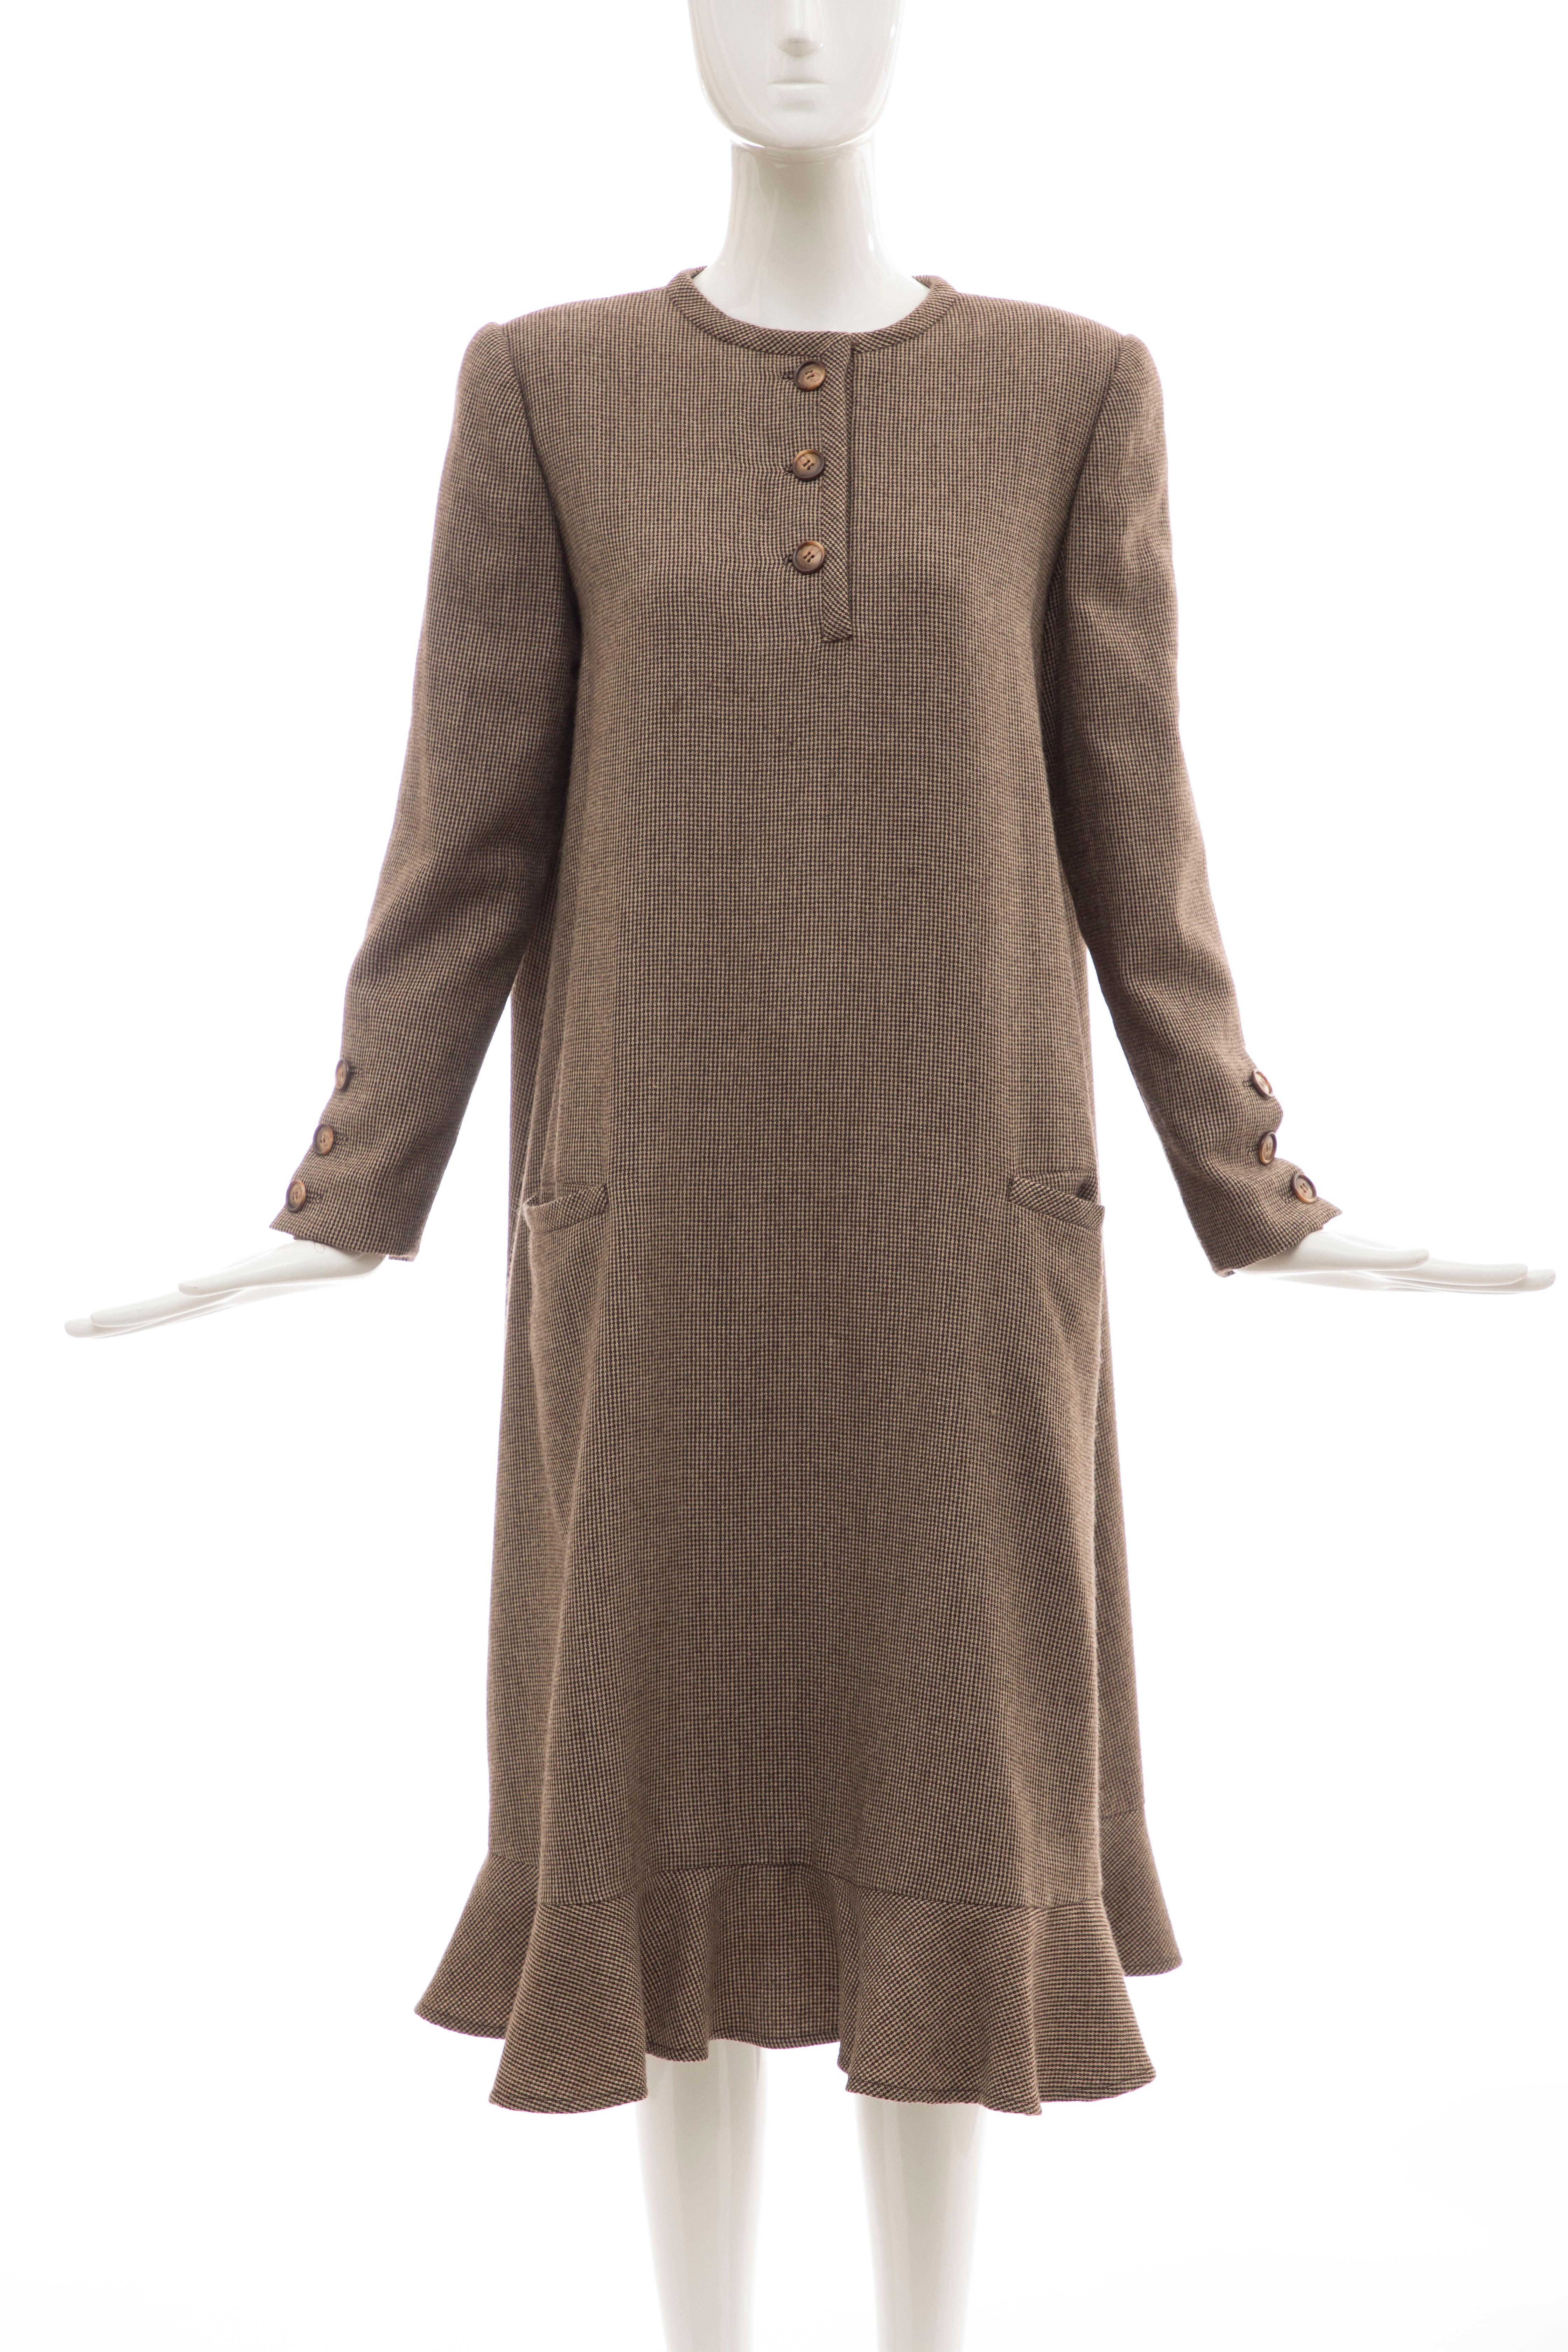 Bill Blass Brown Wool Tweed A Line Button Front Dress, Circa: 1970's In Excellent Condition For Sale In Cincinnati, OH